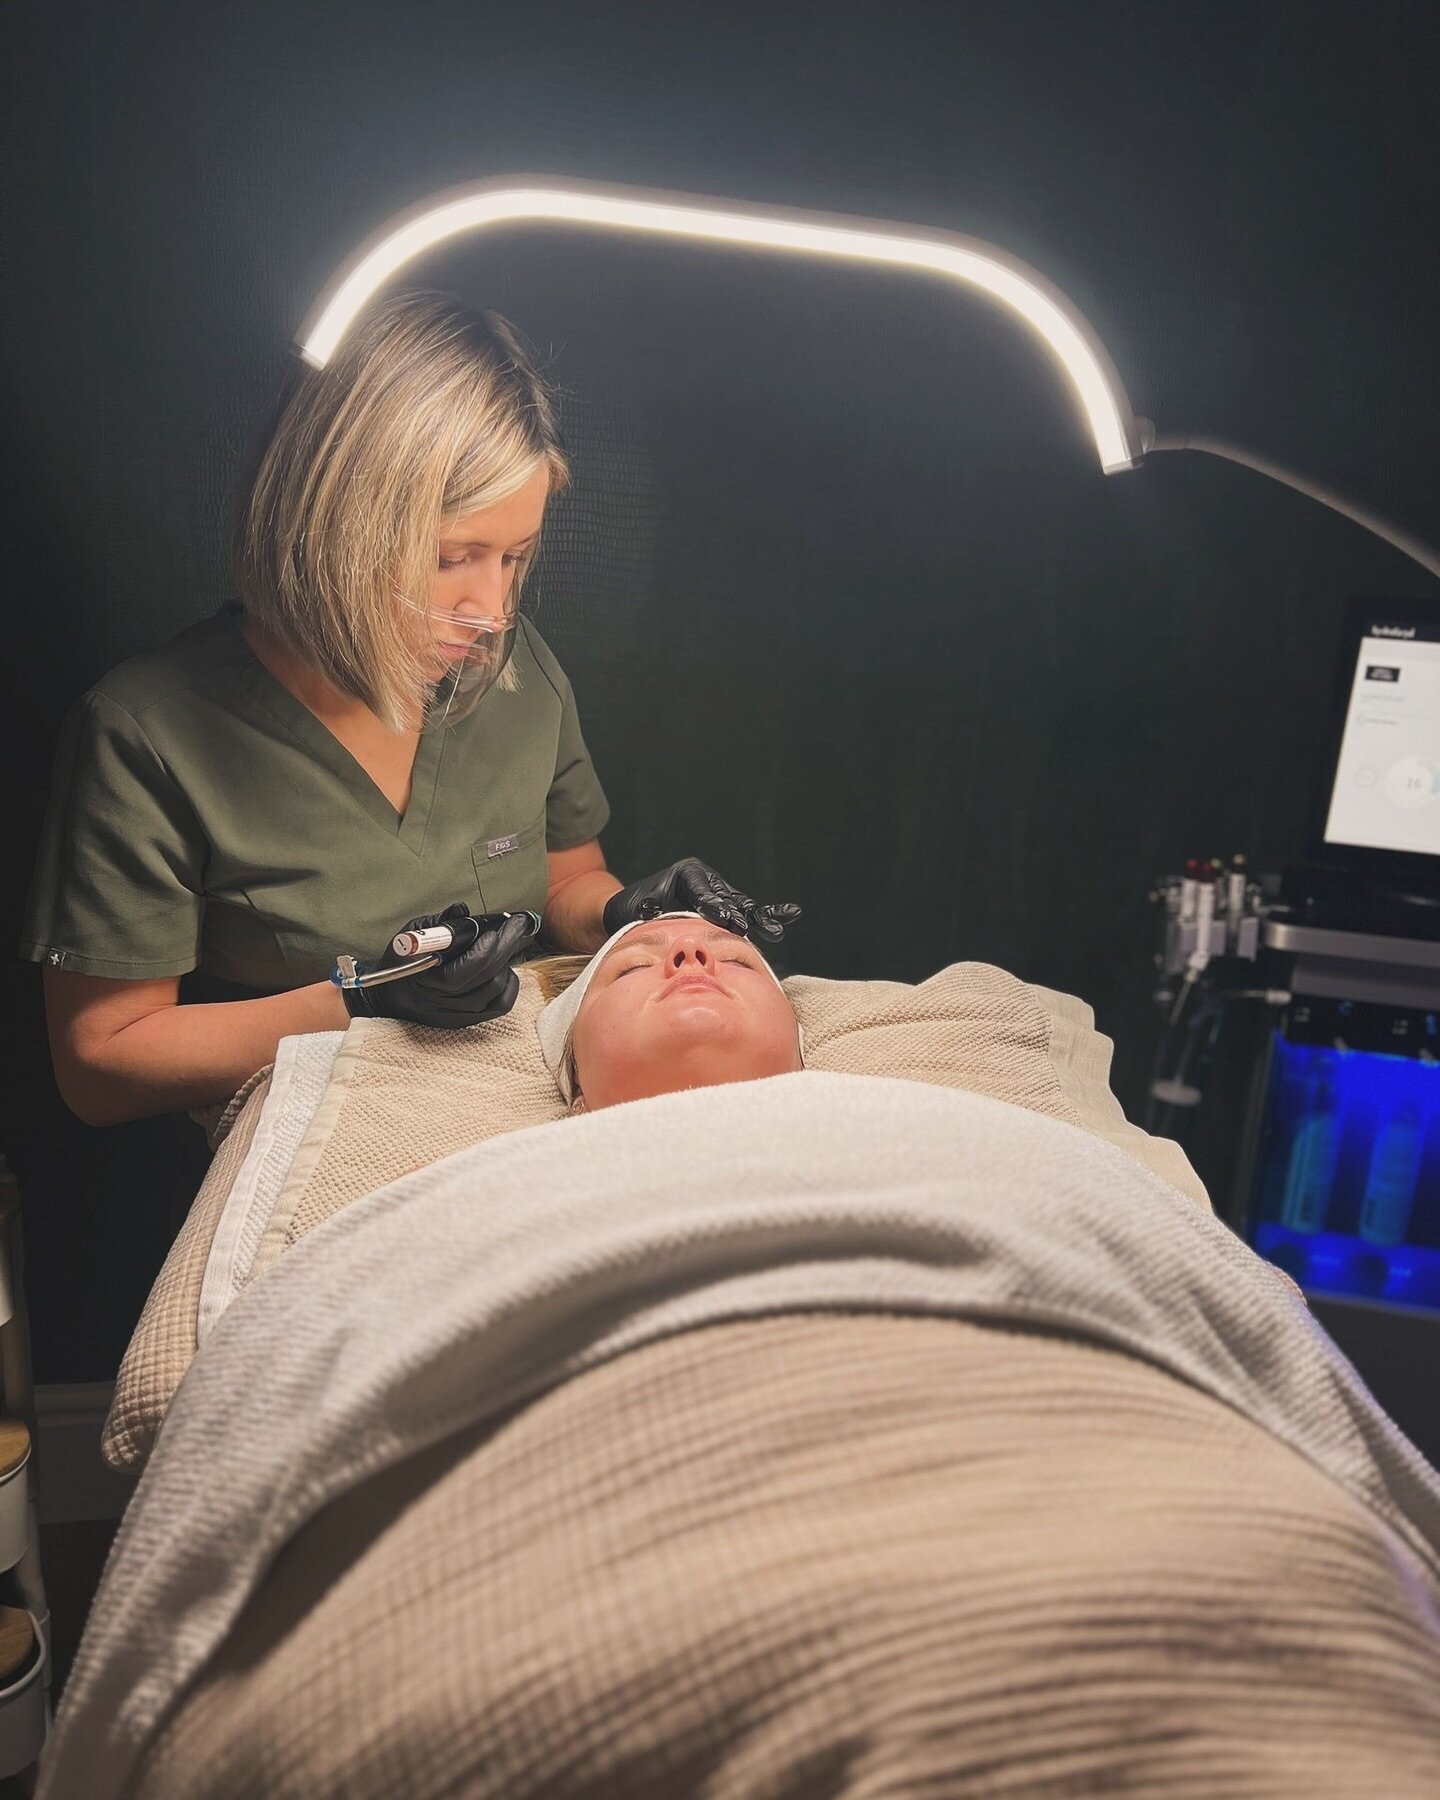 When Your getting your bestie wedding ready 💒 

Hydrafacial prep In full swing for this beauty. 
Working on the best skin possible for her big day In June. 

Monthly hydrafacial&rsquo;s with a full dmk home care  routine
are the one. 

#hydrafacial 